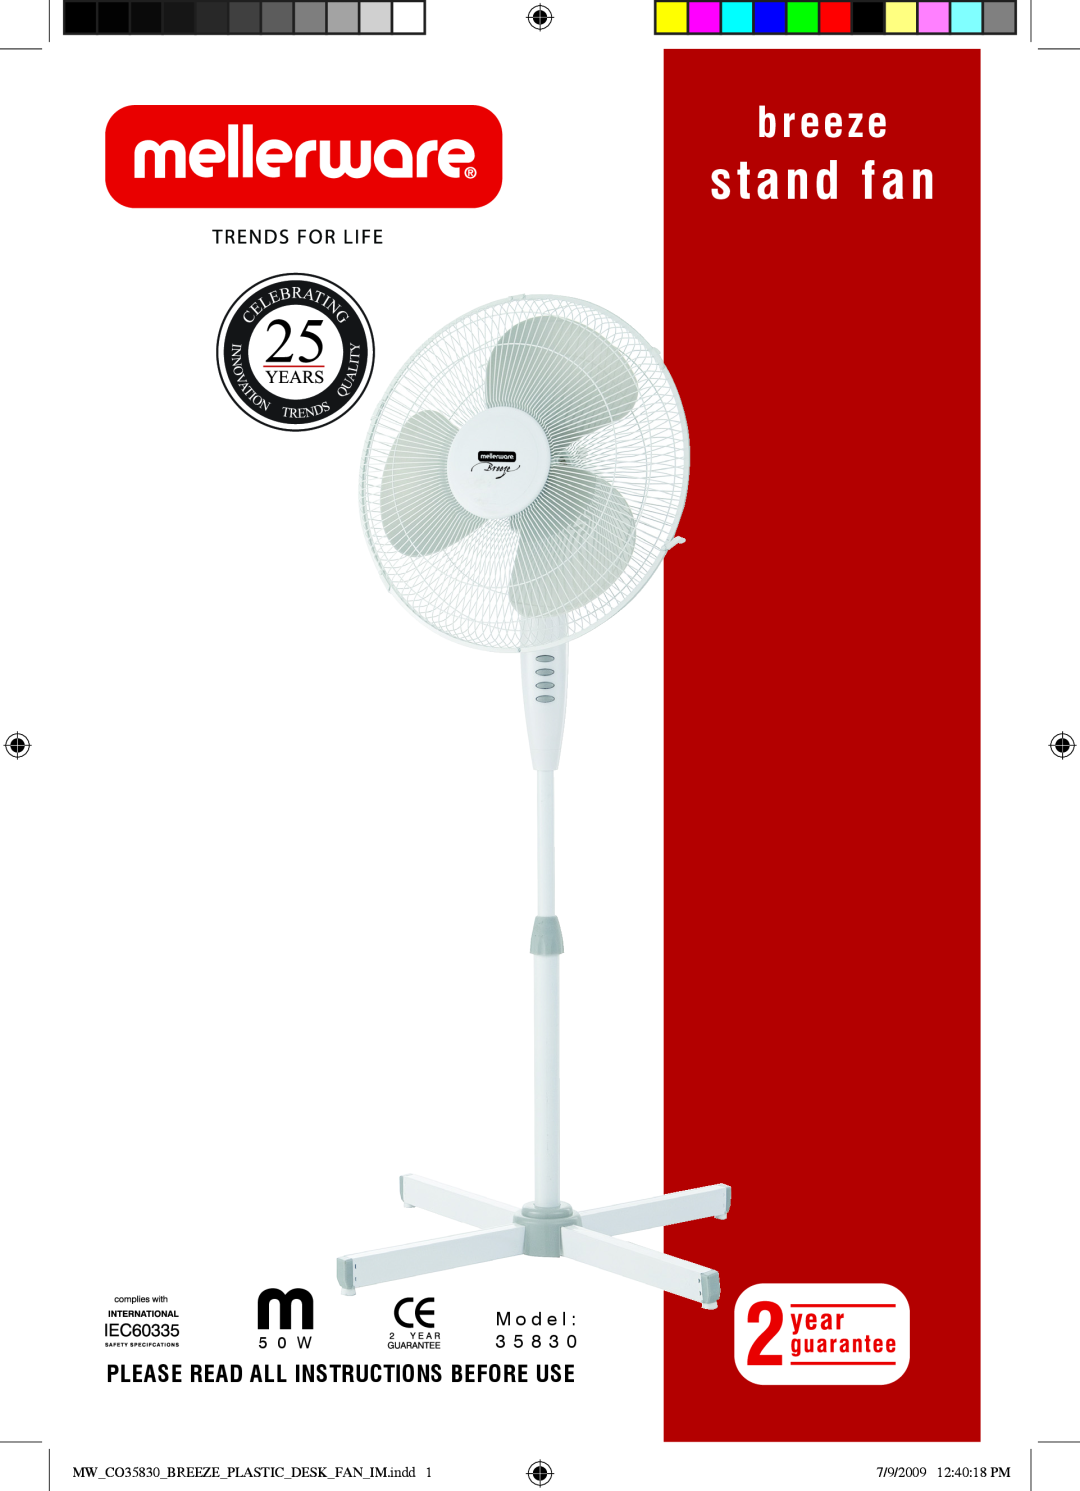 Mellerware 3 5 8 3 05 0 W manual stand fan, breeze, Please Read All Instructions Before Use, 7/9/2009 12 40 18 PM 